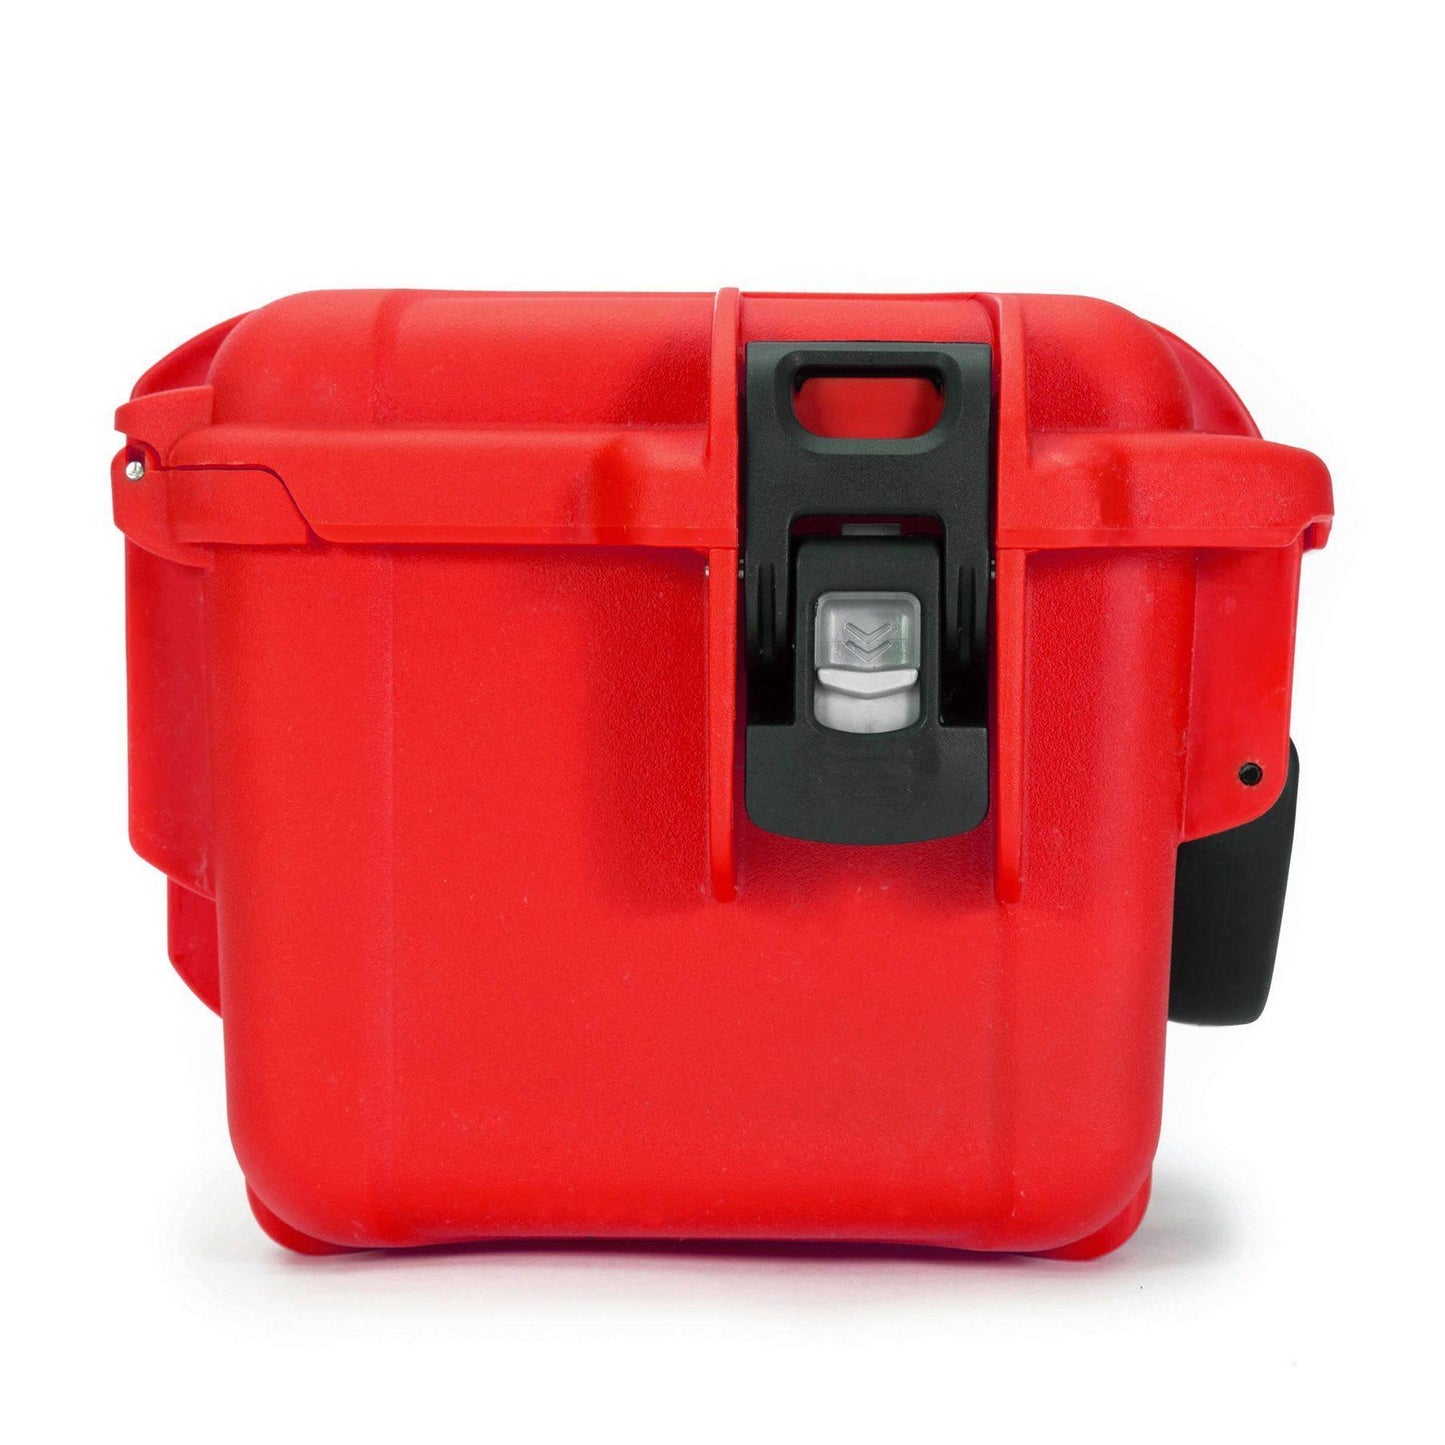 NANUK 908 First Aid Waterproof and Durable Case - FirstAidPlus